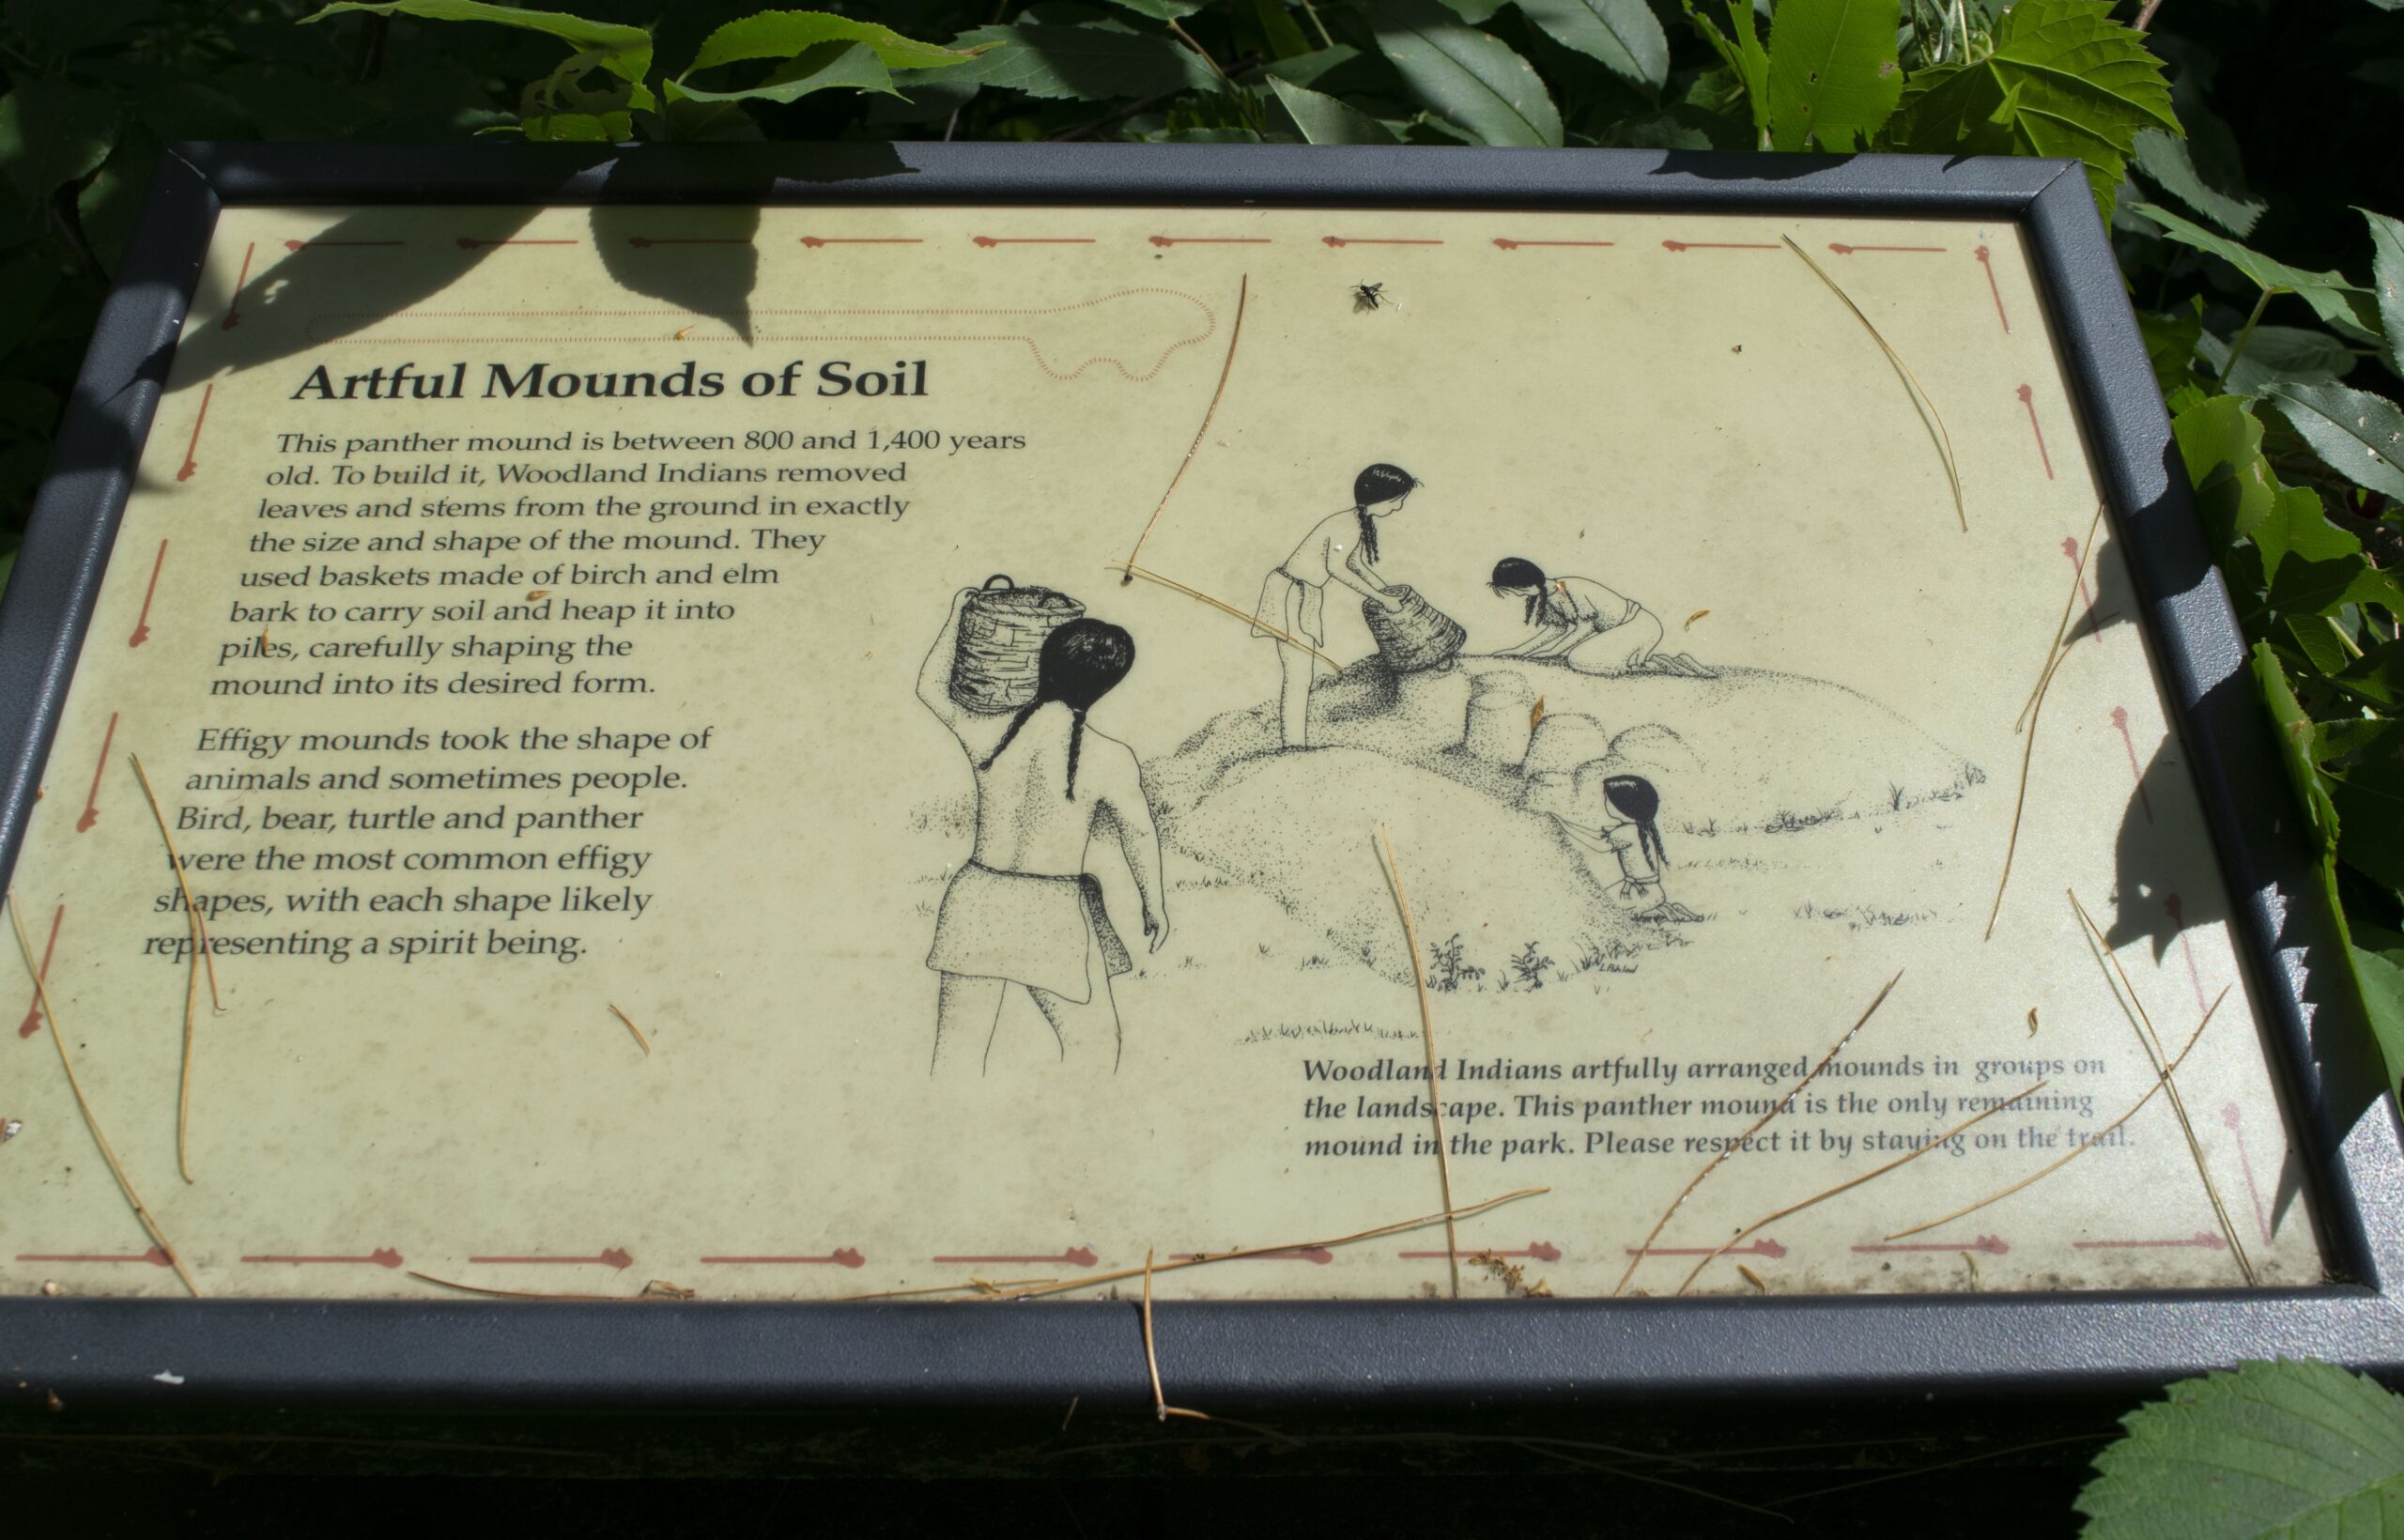 This sign at Lake Wissota State Park explains to hikers along the Lake Trail that this is the site of a sacred effigy mound